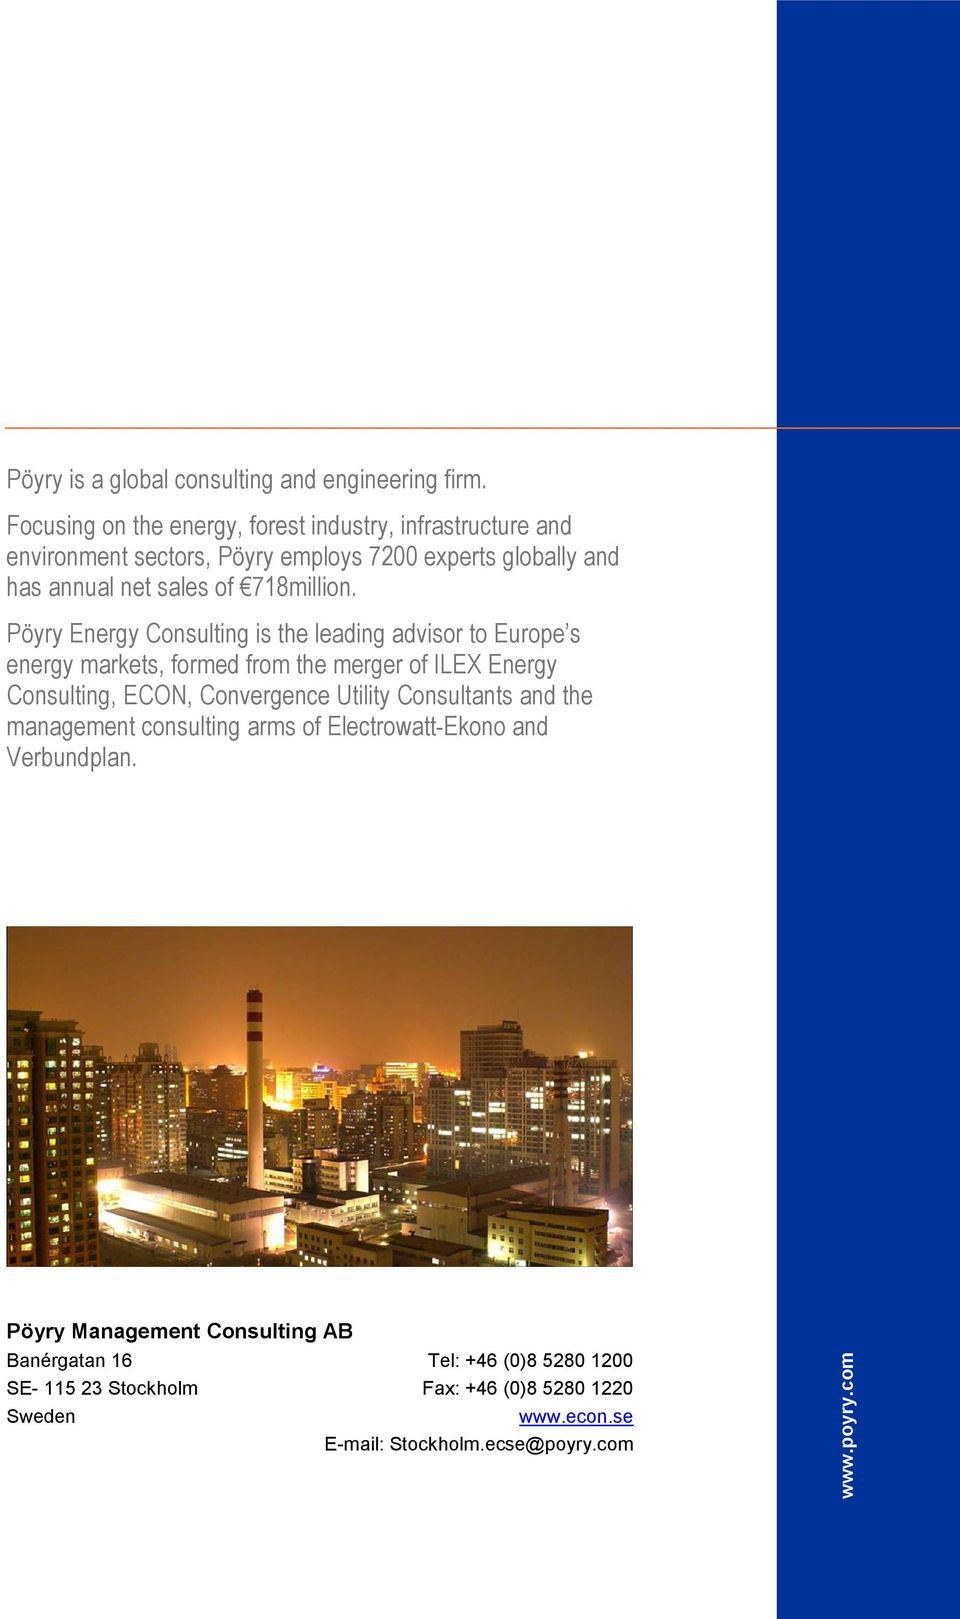 Pöyry Energy Consulting is the leading advisor to Europe s energy markets, formed from the merger of ILEX Energy Consulting, ECON, Convergence Utility